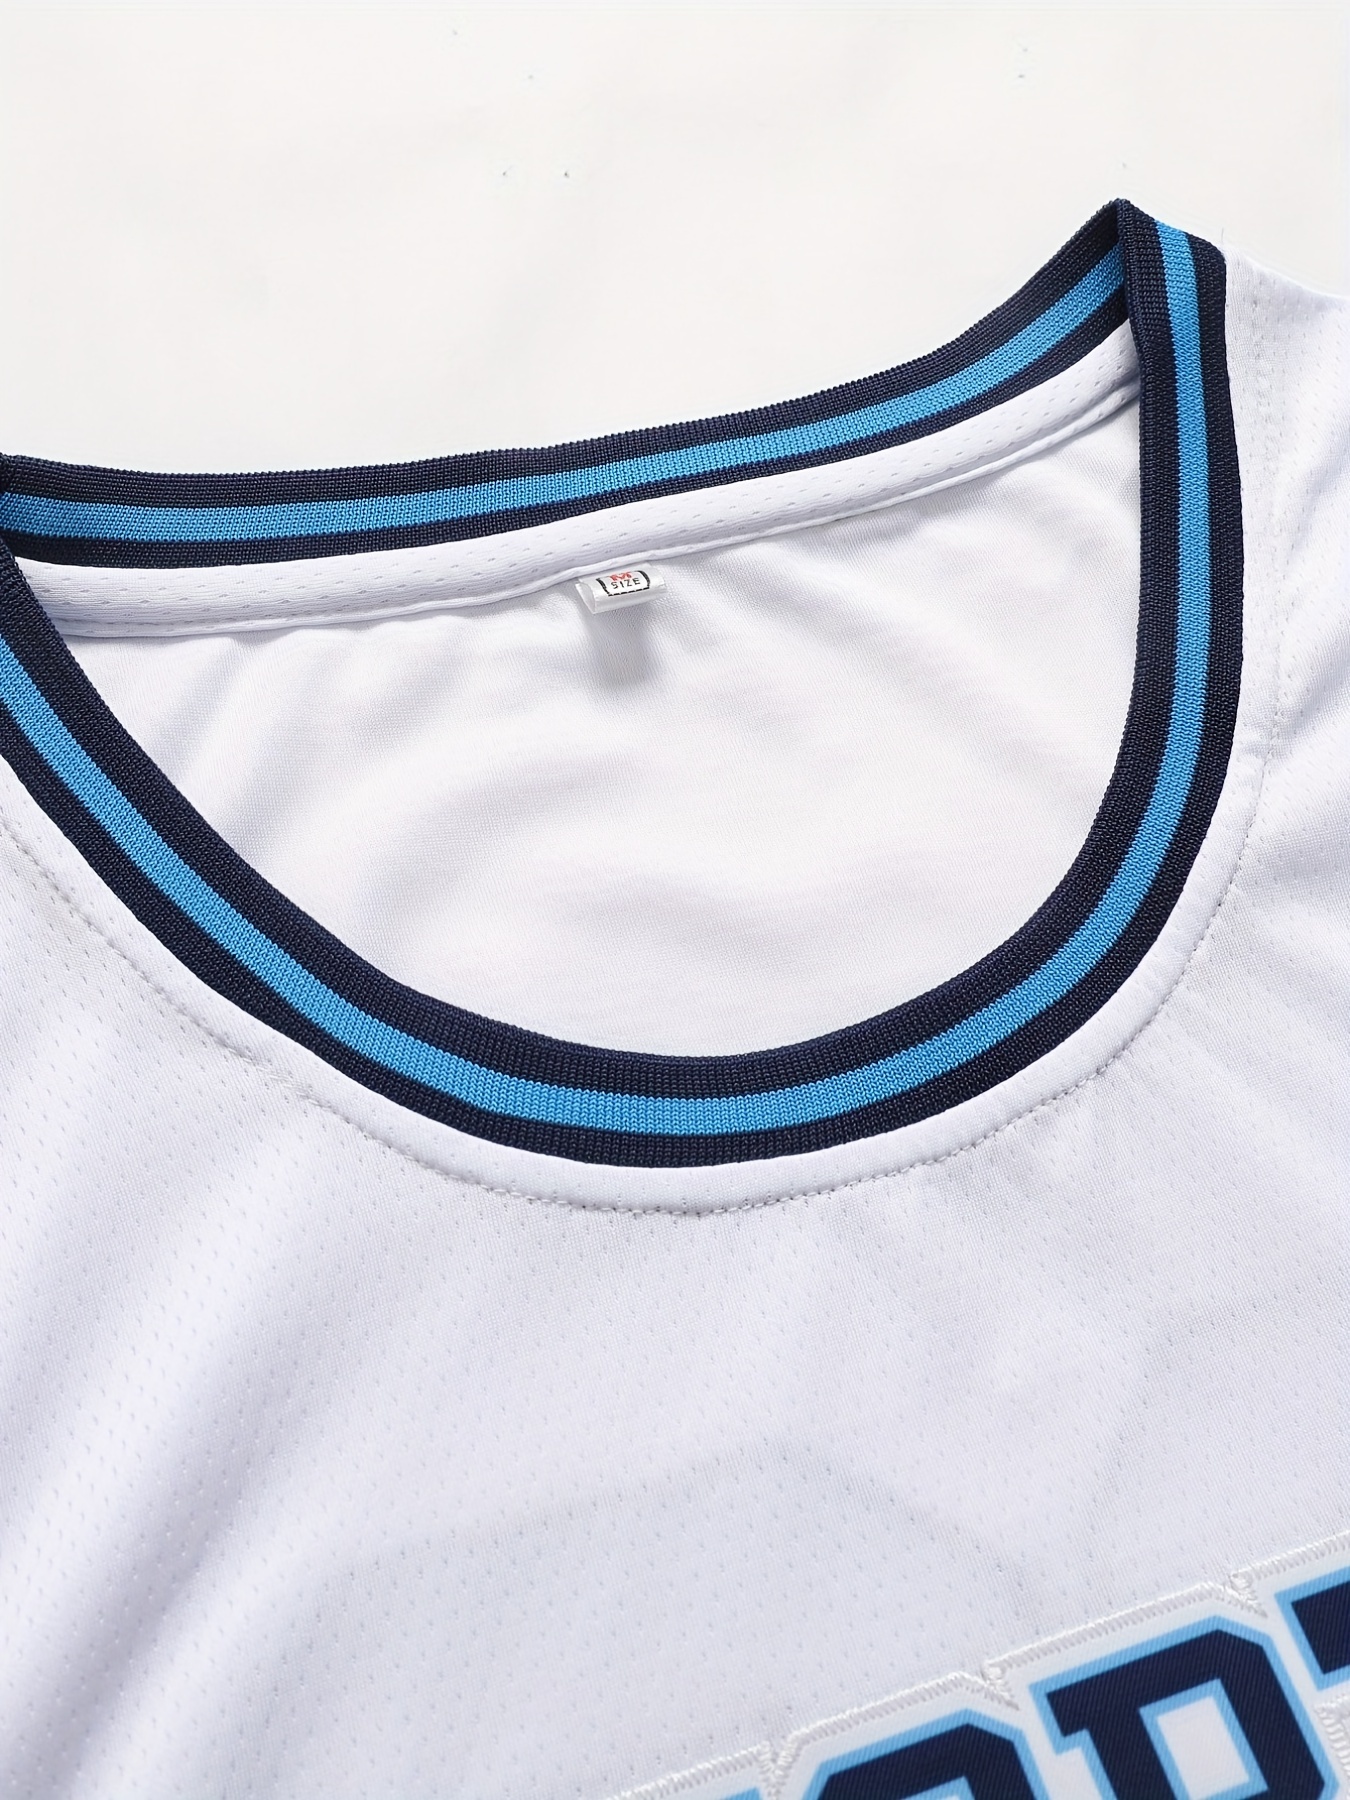 Retro 23 Basketball Jersey For Men Classic Embroidered Design Perfect For  Parties And Gifts, 24/7 Customer Service